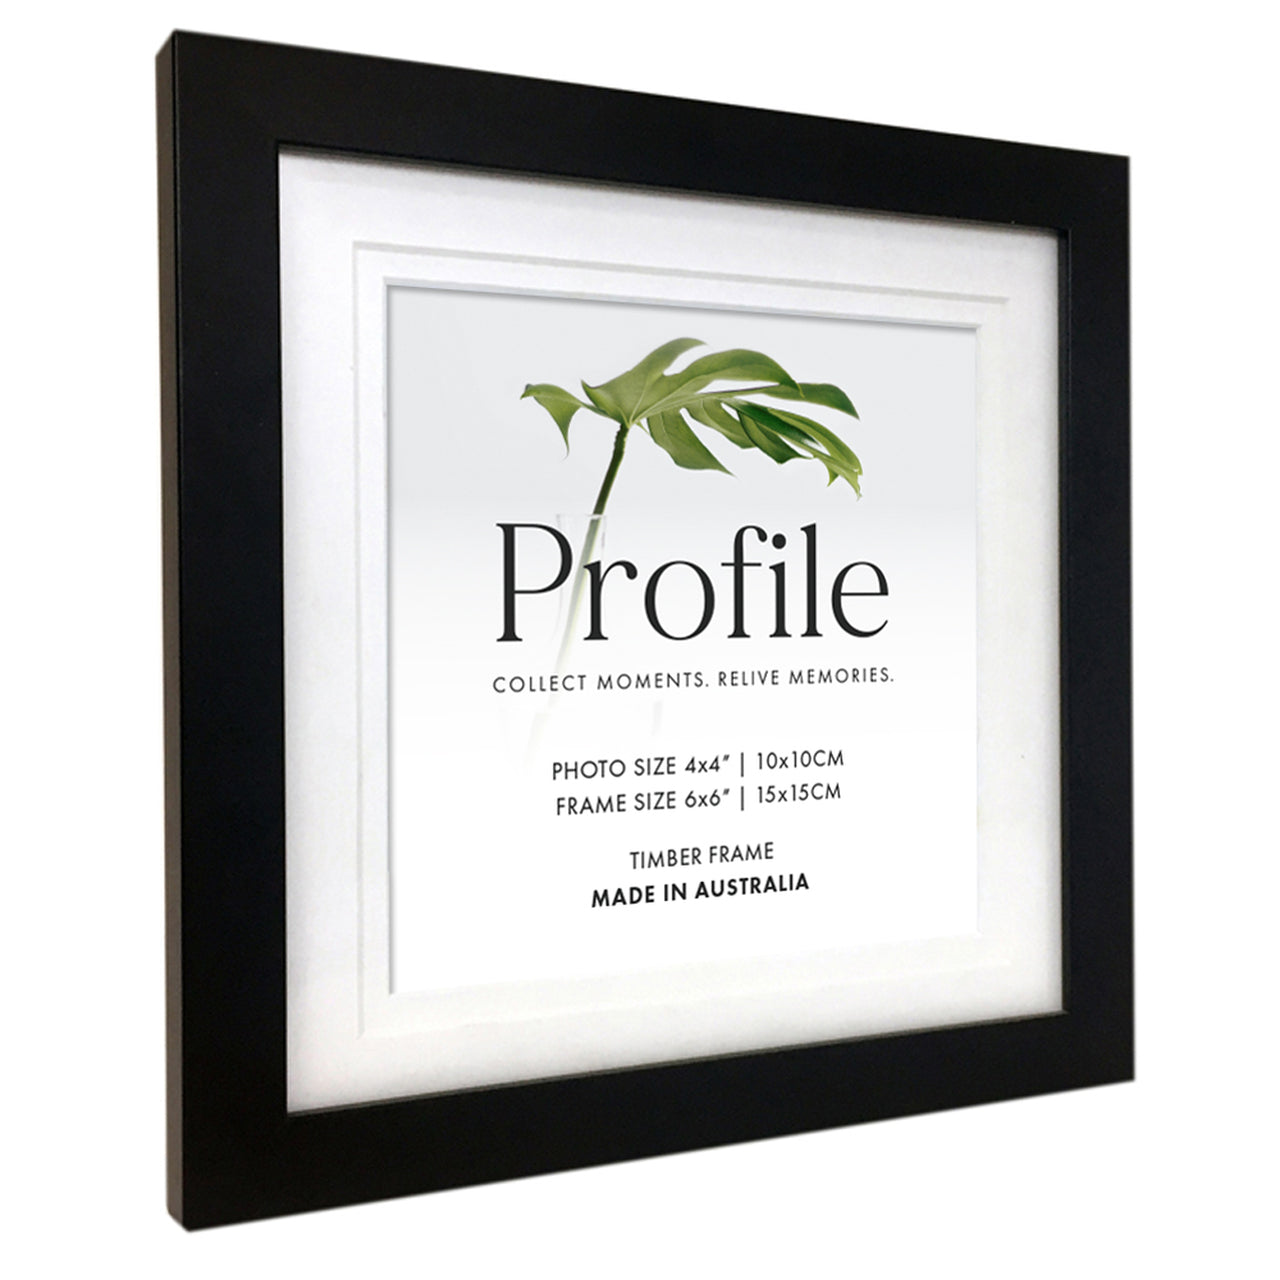 Deluxe Black 12x12 Photo Frame with 10x10 opening